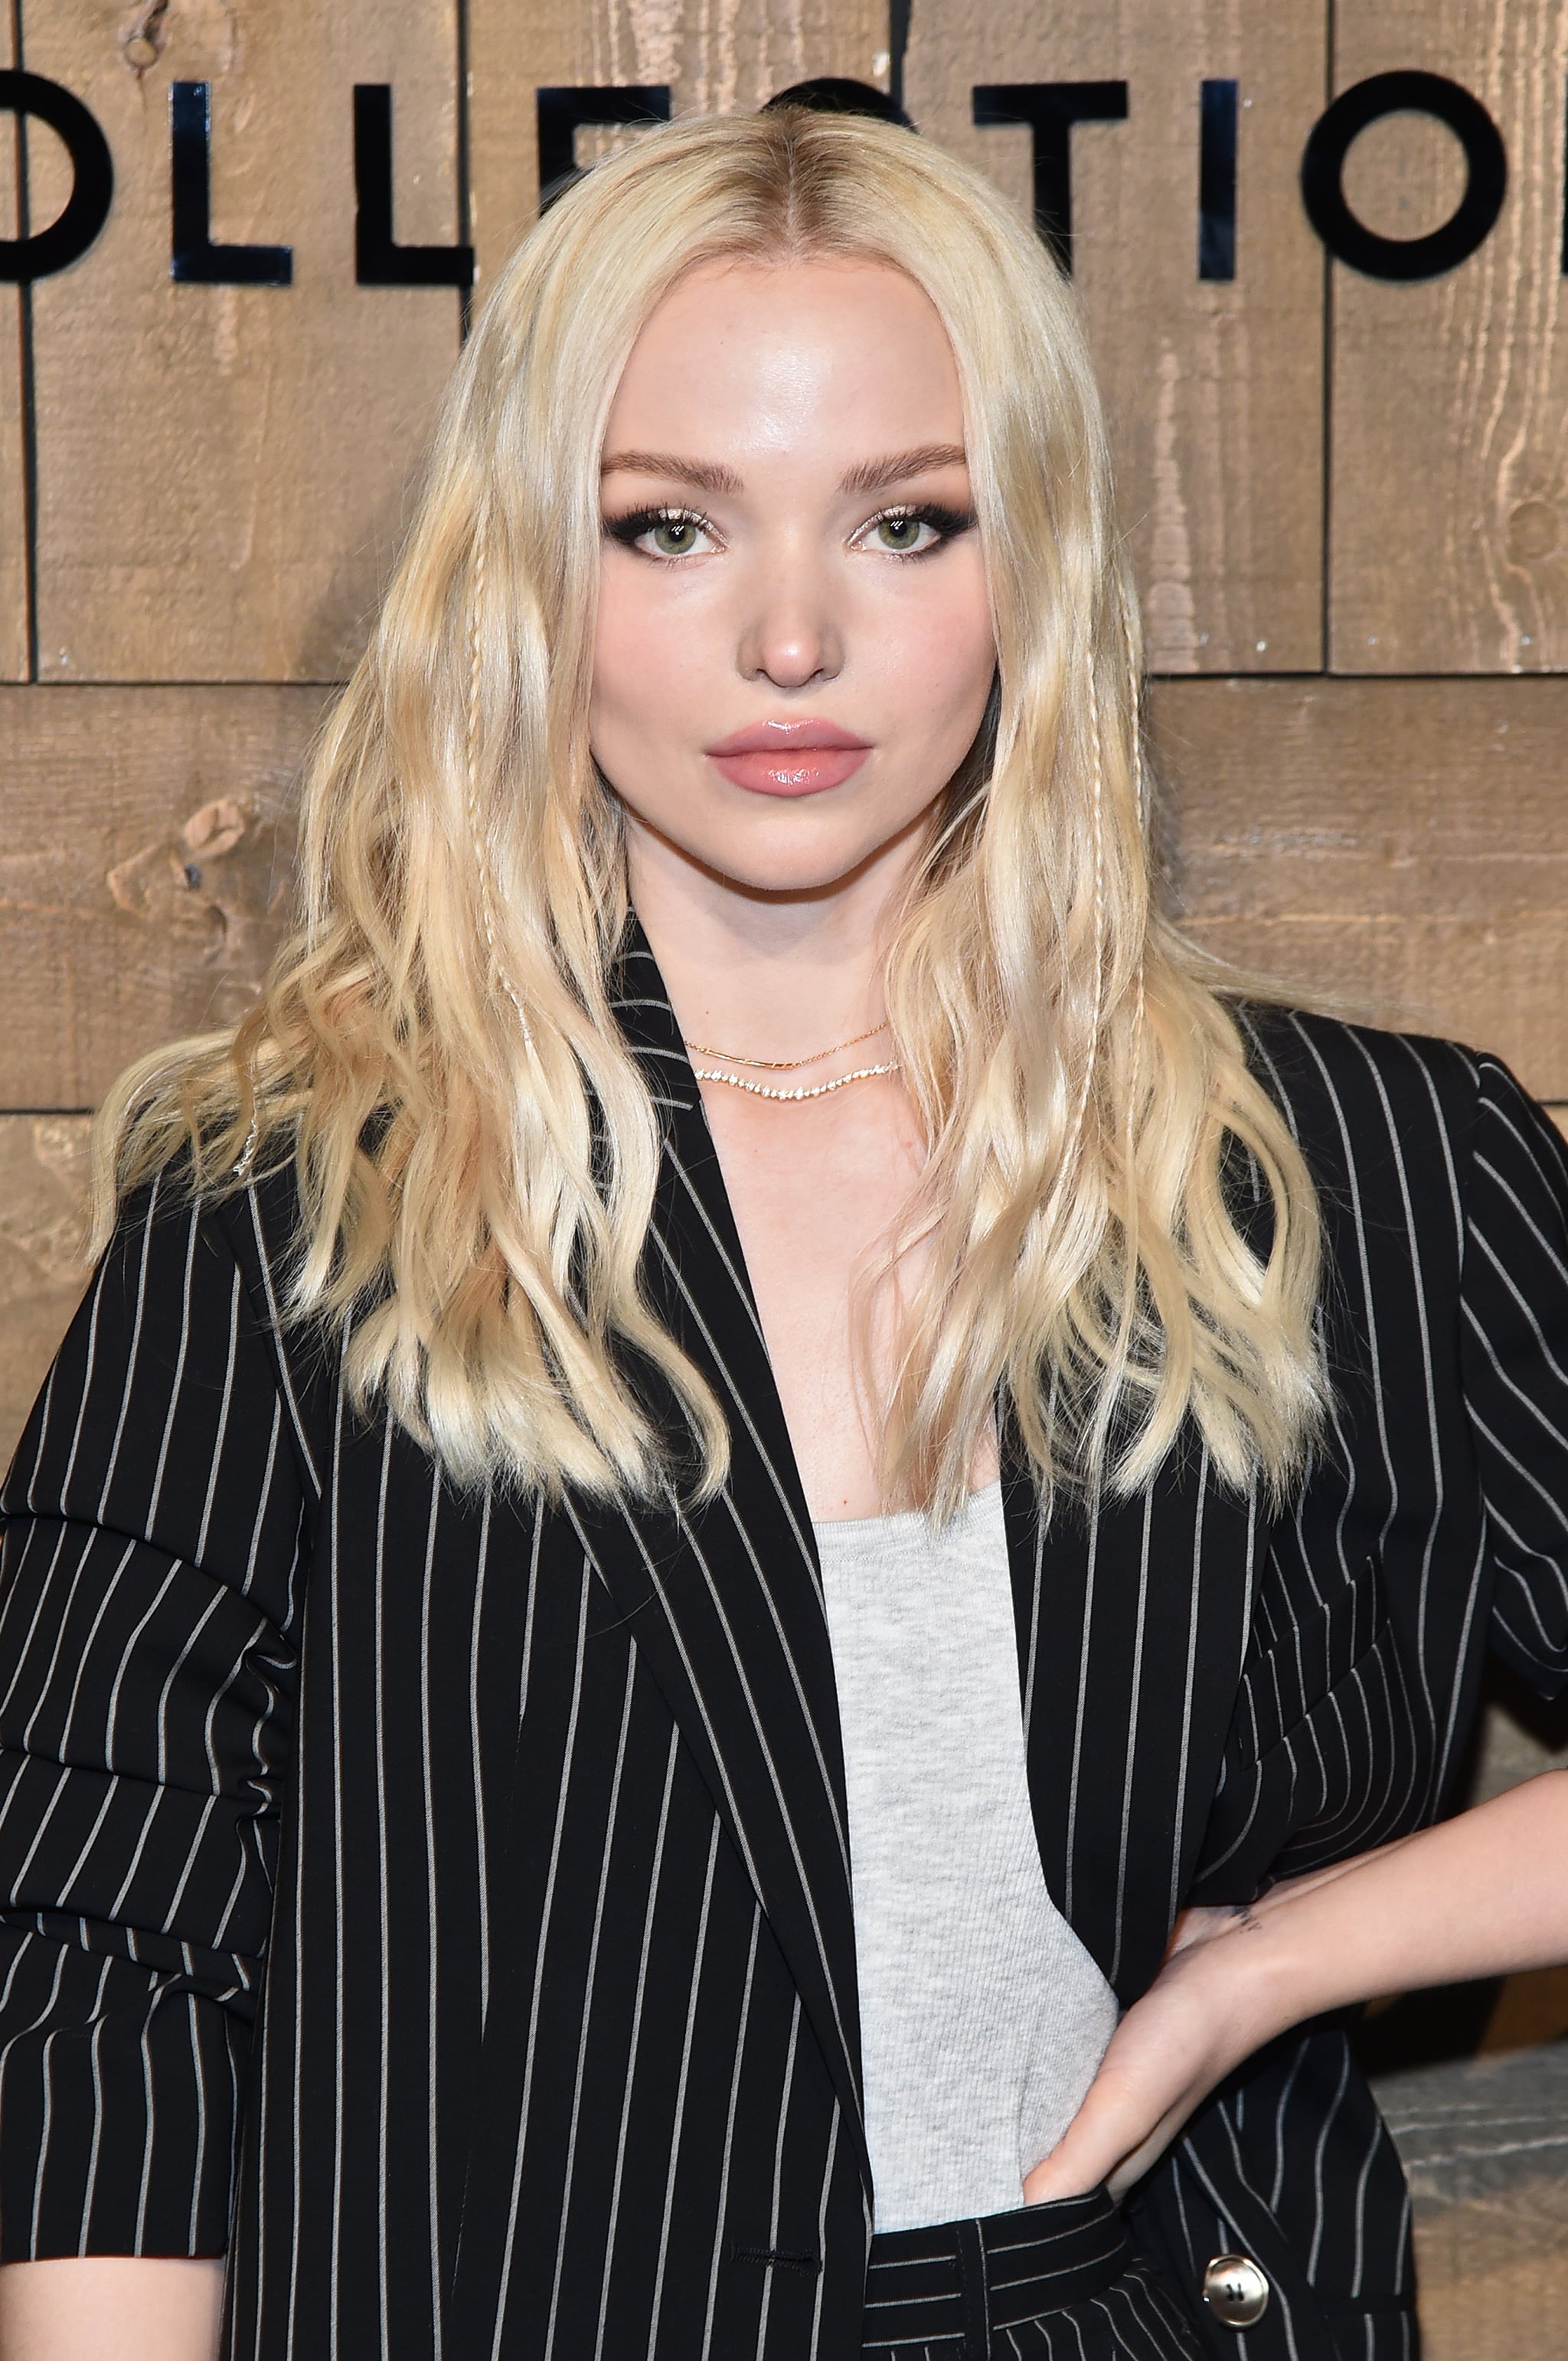 NEW YORK, NEW YORK - FEBRUARY 12: Dove Cameron attends the Michael Kors FW20 Runway Show on February 12, 2020 in New York City. (Photo by Jamie McCarthy/Getty Images for Michael Kors)